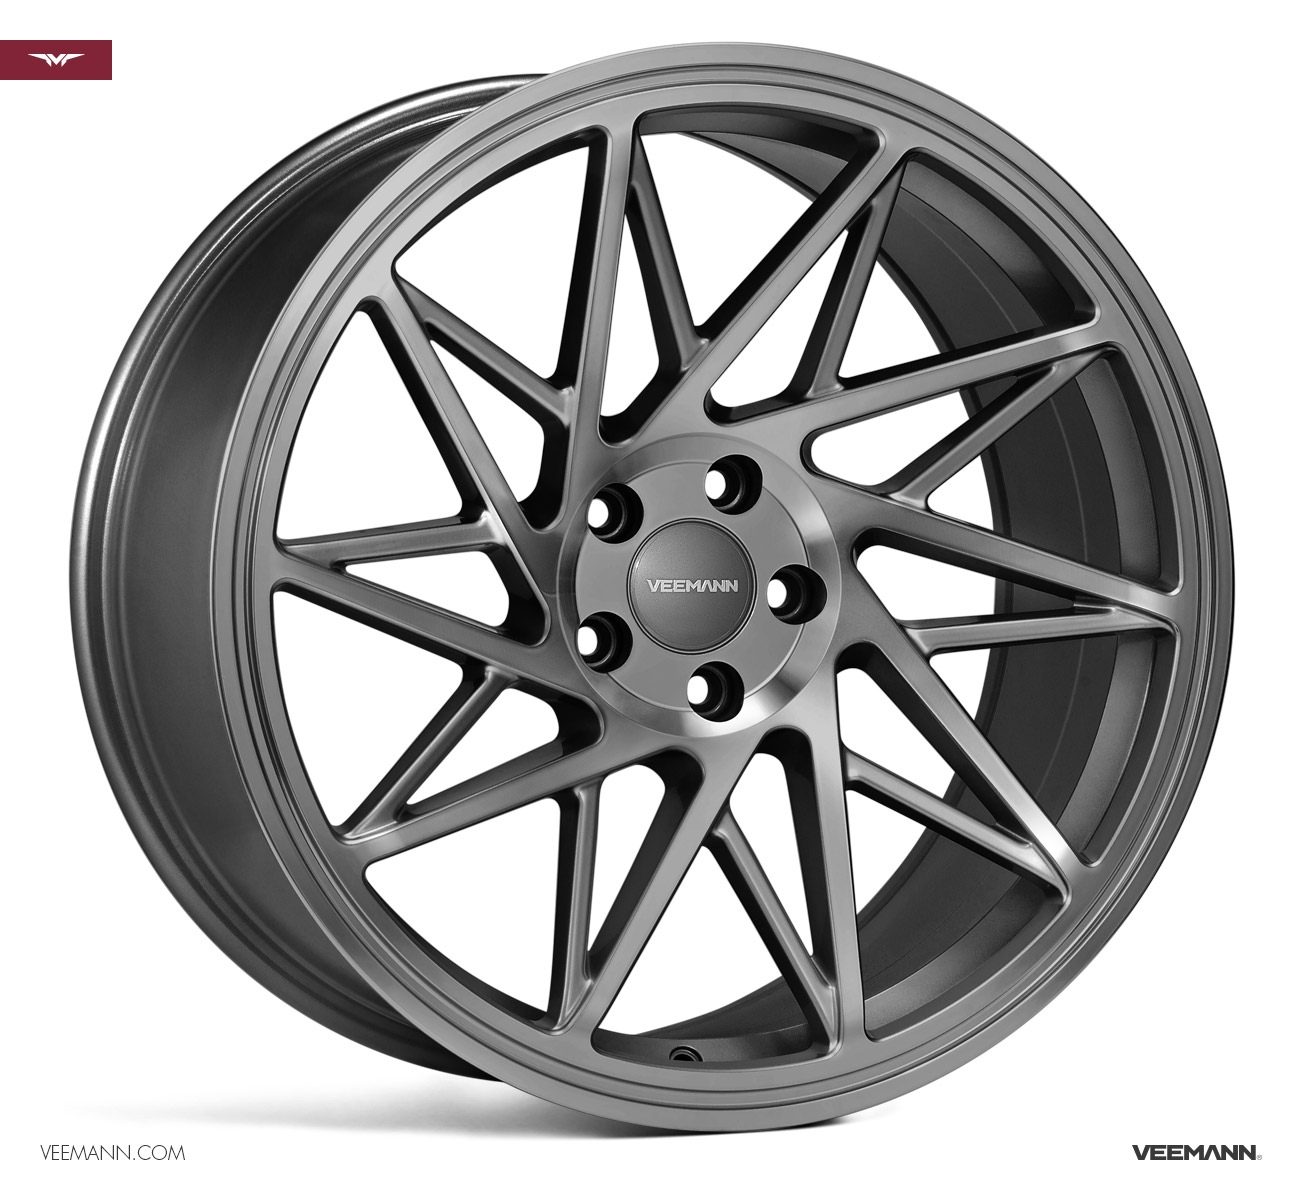 NEW 20" VEEMANN V-FS35 ALLOY WHEELS IN GLOSS GRAPHITE WITH WIDER 10" REARS